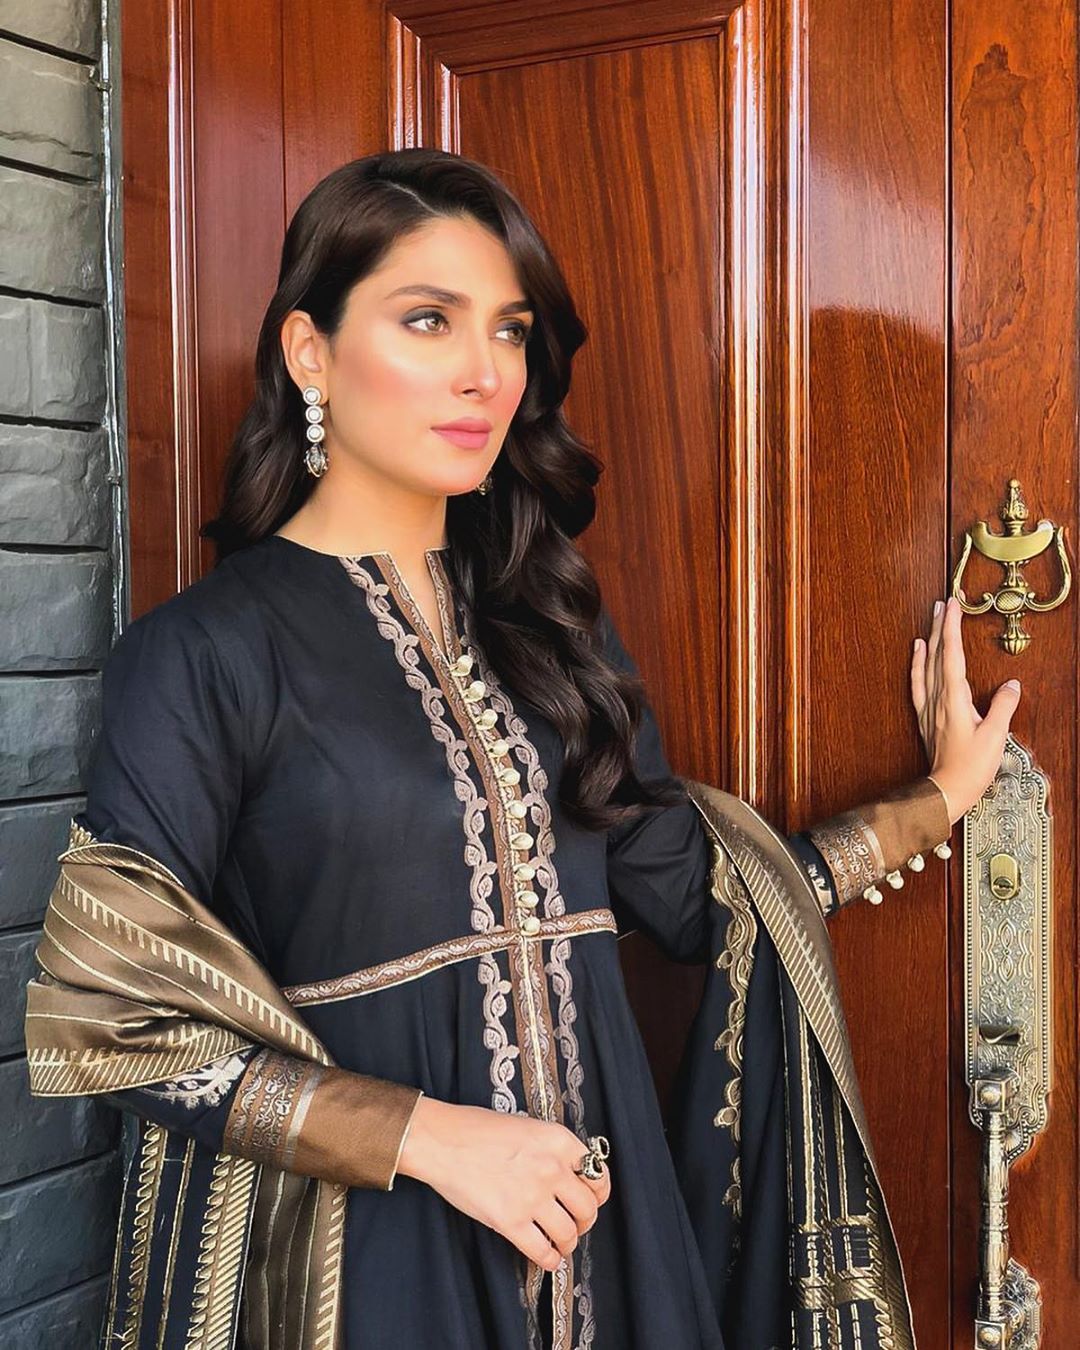 Ayeza Khan Looking Gorgeous in this Beautiful Black Outfit